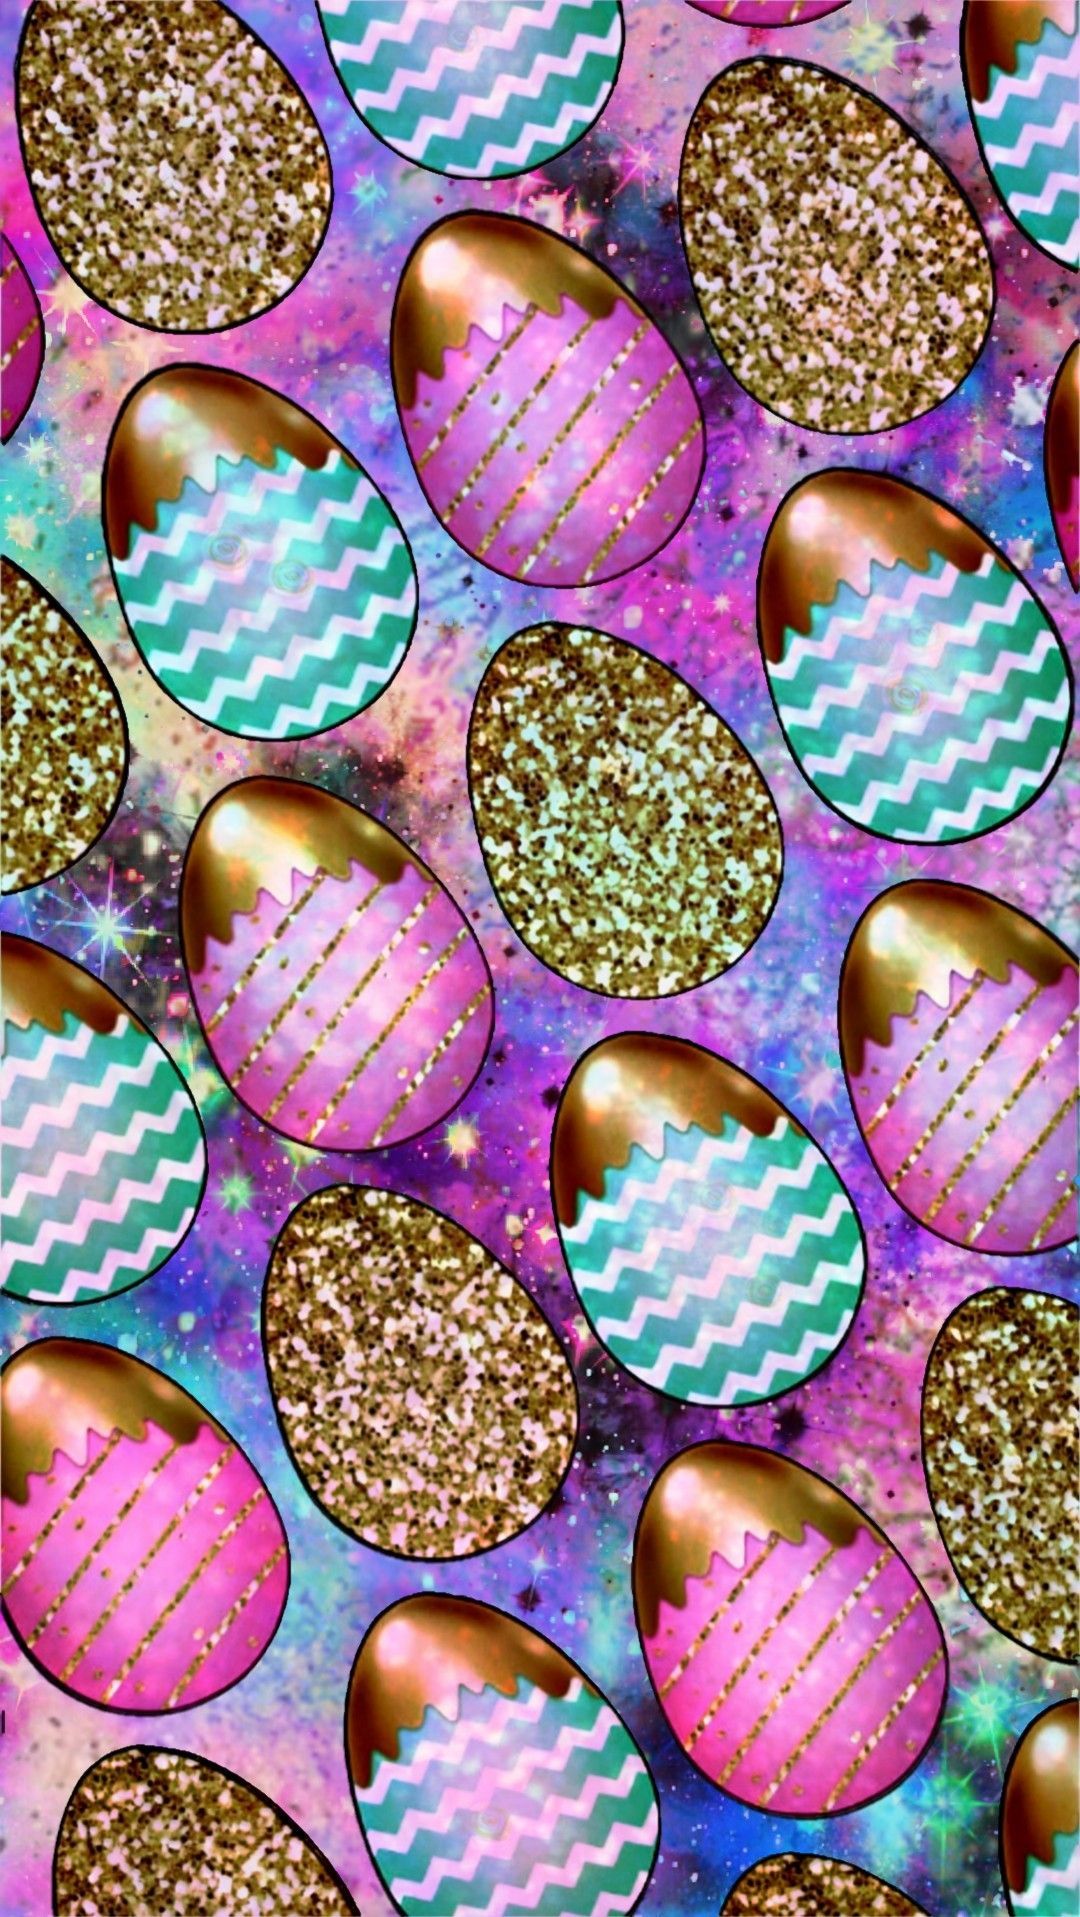 Galaxy Easter Eggs, made by me #patterns #colorful #glitter #background # wallpaper #sparkles #glittery #g. Easter wallpaper, Glitter wallpaper, Purple wallpaper